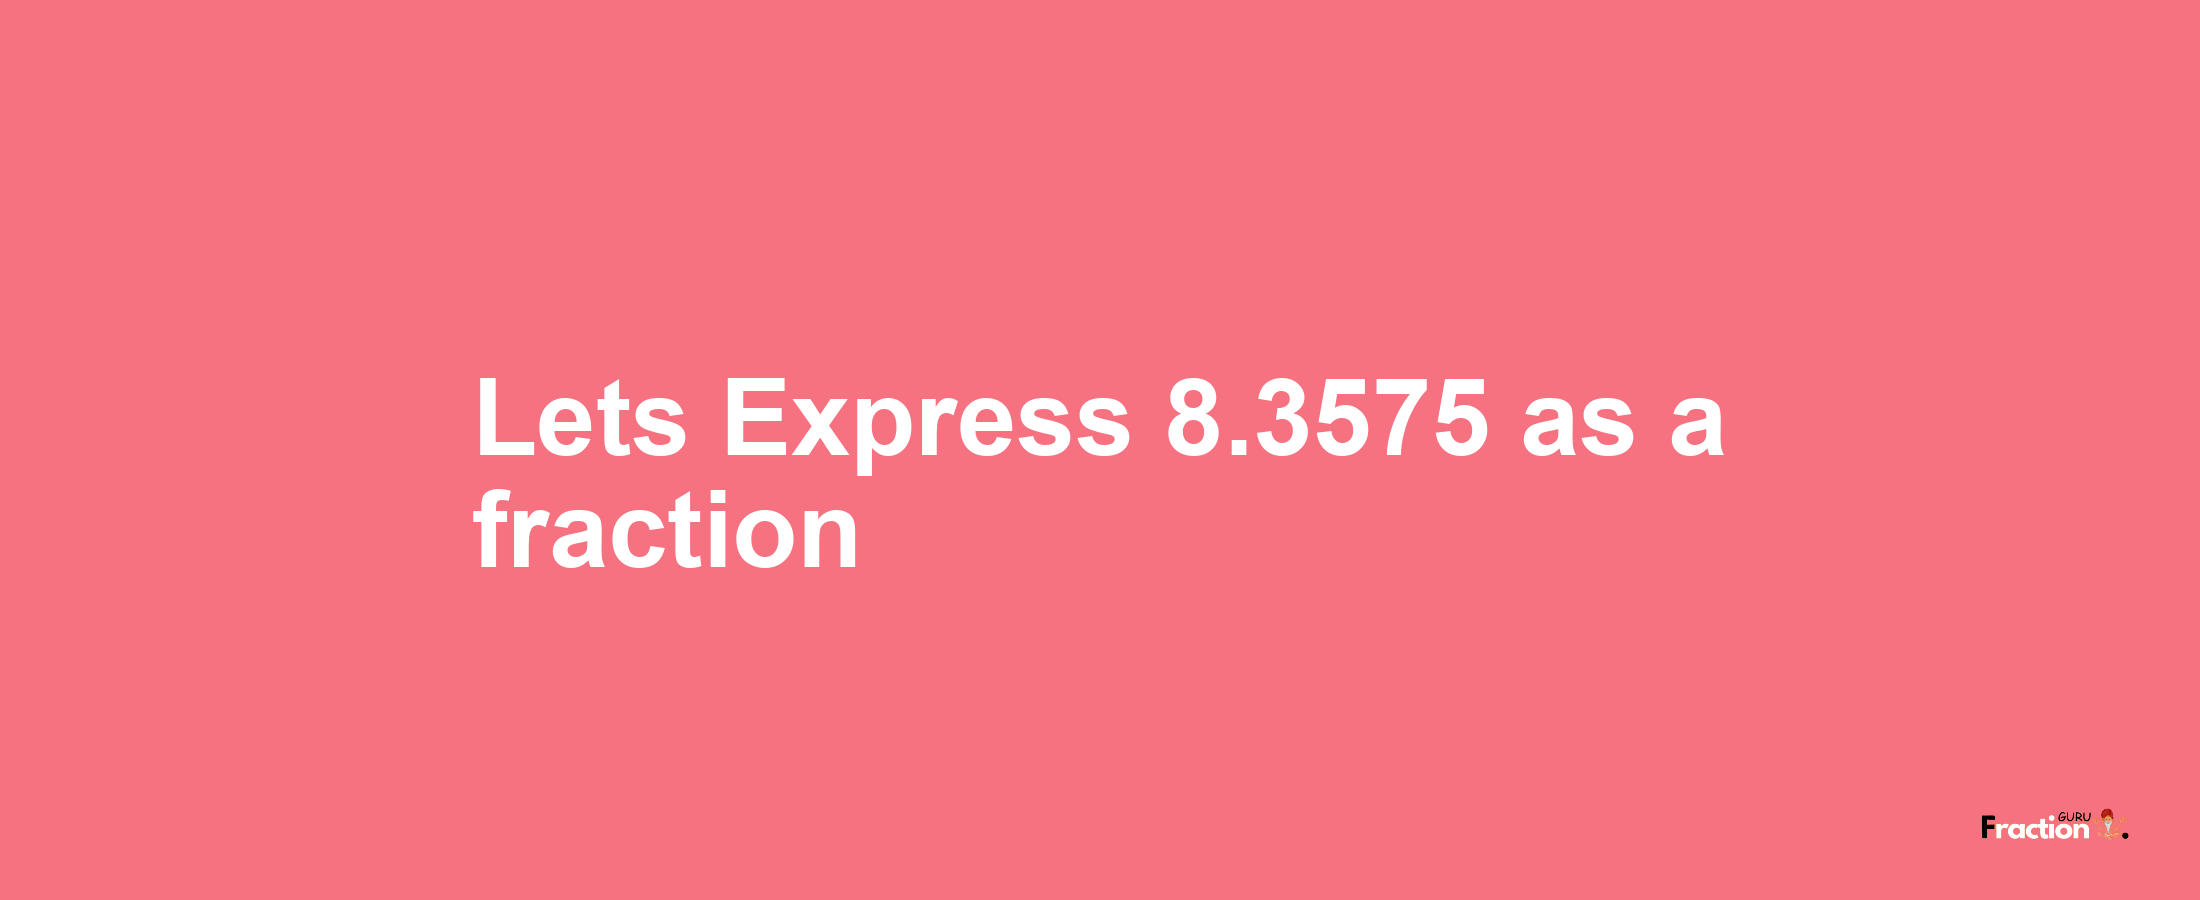 Lets Express 8.3575 as afraction